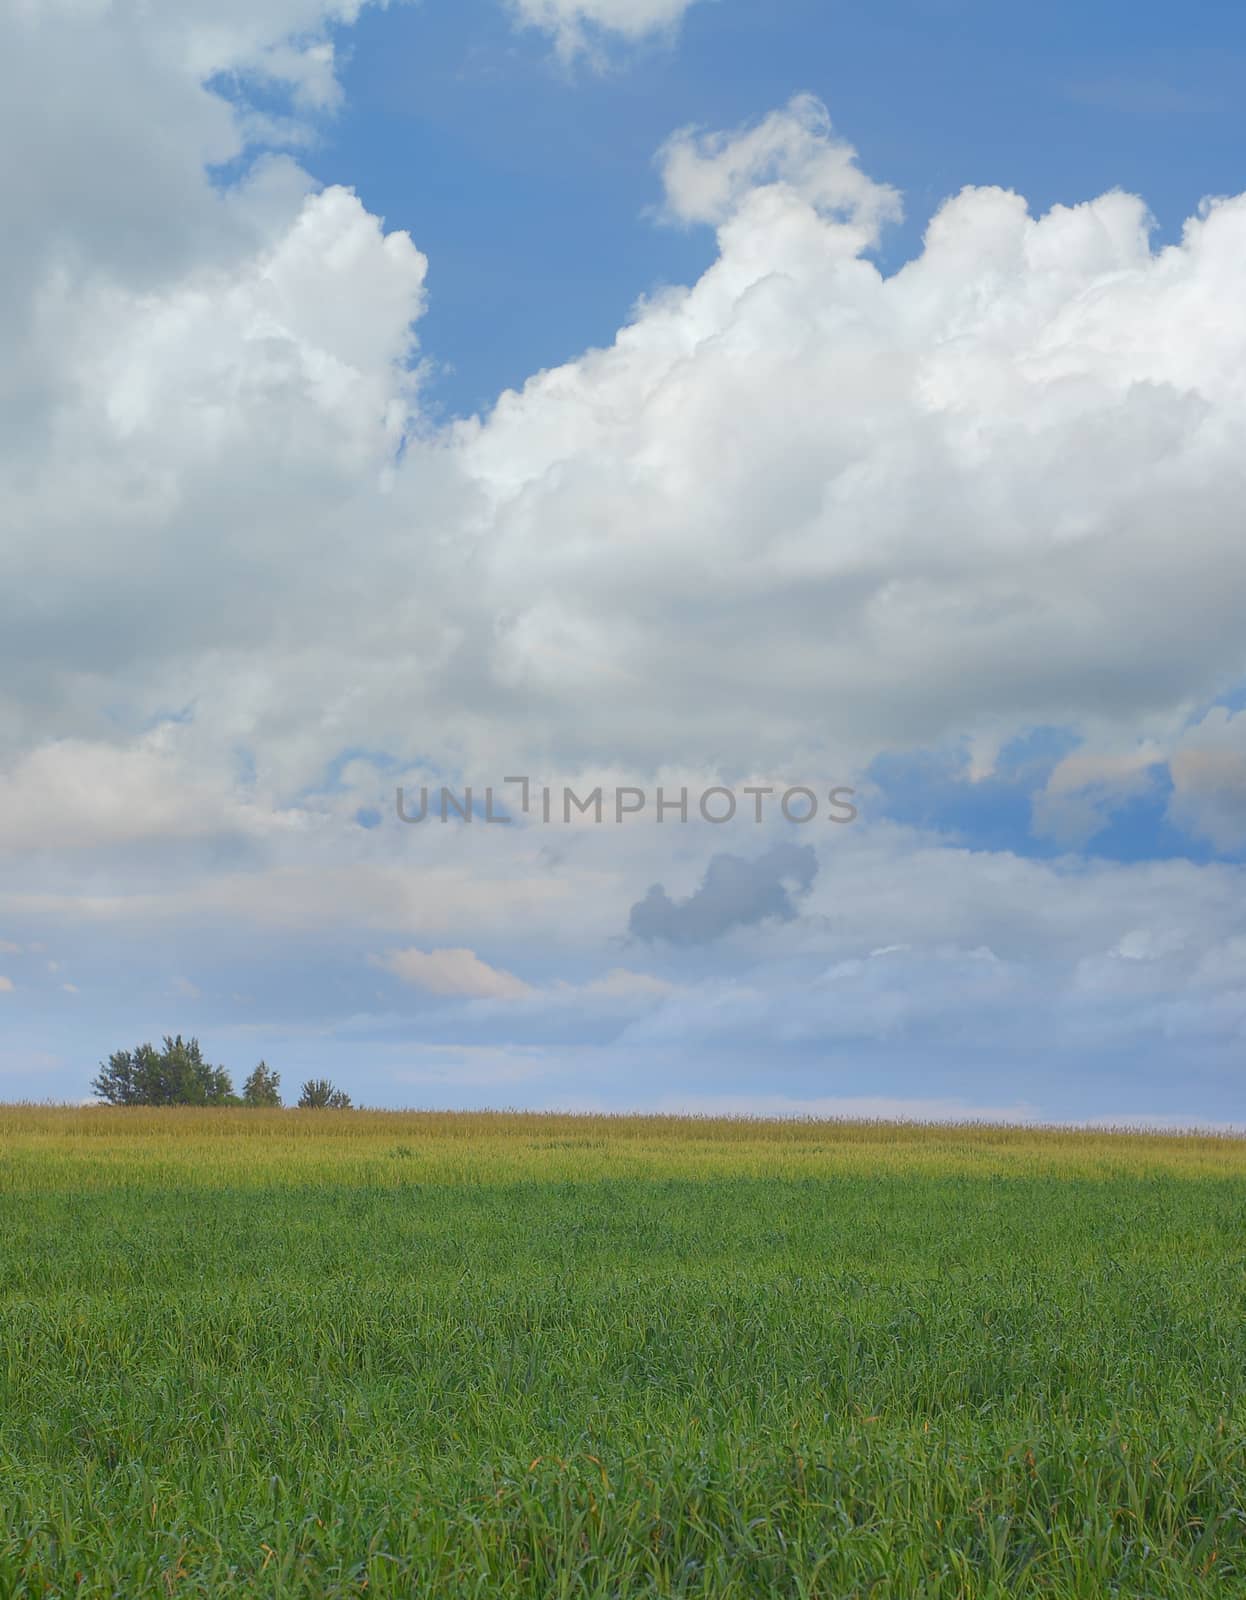 Simple european countryside landscape. Agriculture rural area.